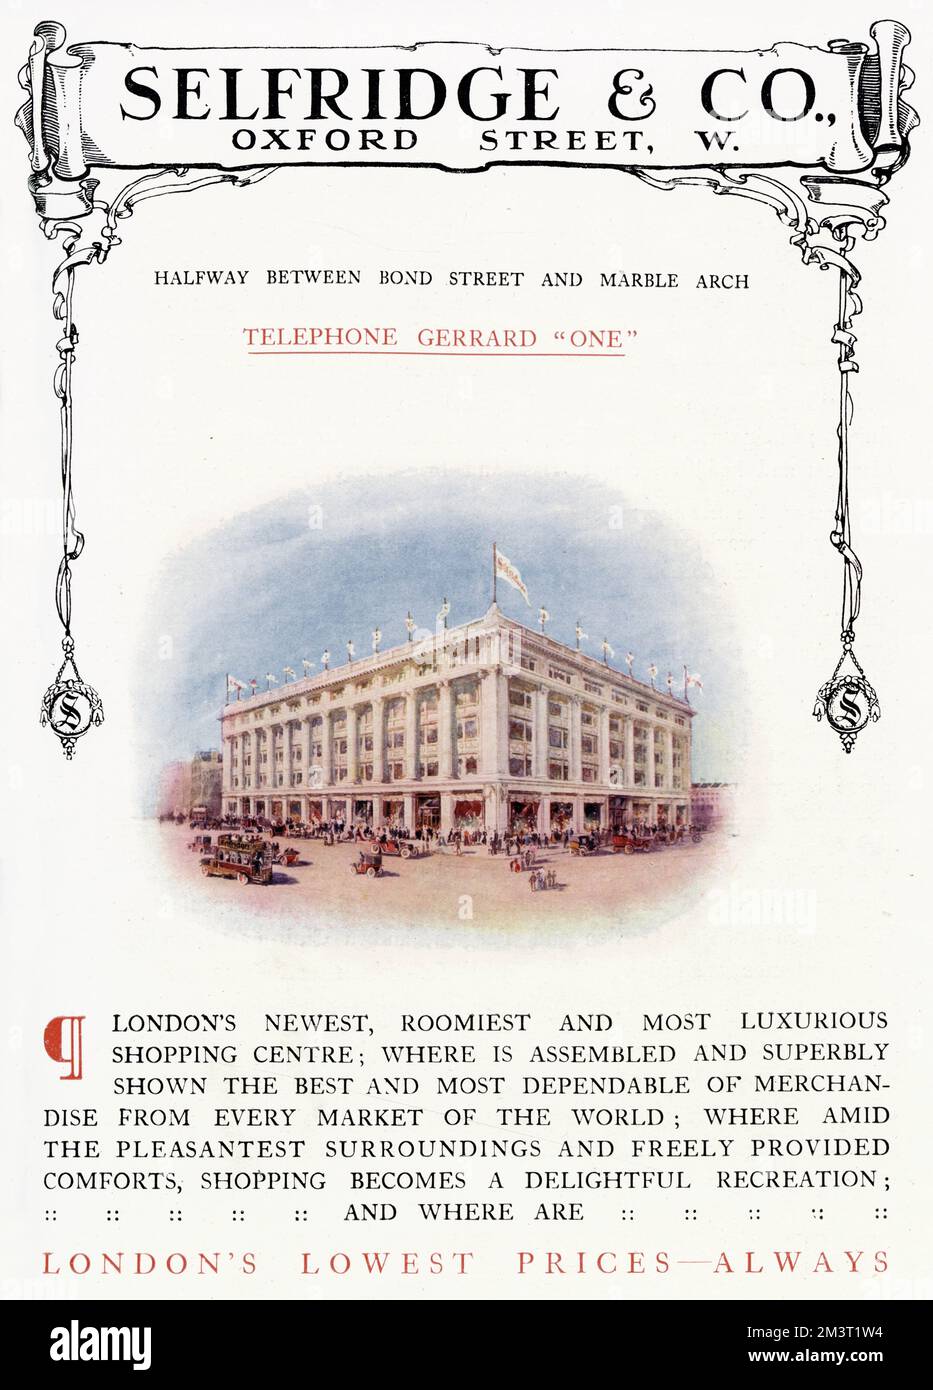 Advertising insert for the newly opened Selfridges department store on Oxford Street, placed in Printers' Pie magazine for that year. Stock Photo